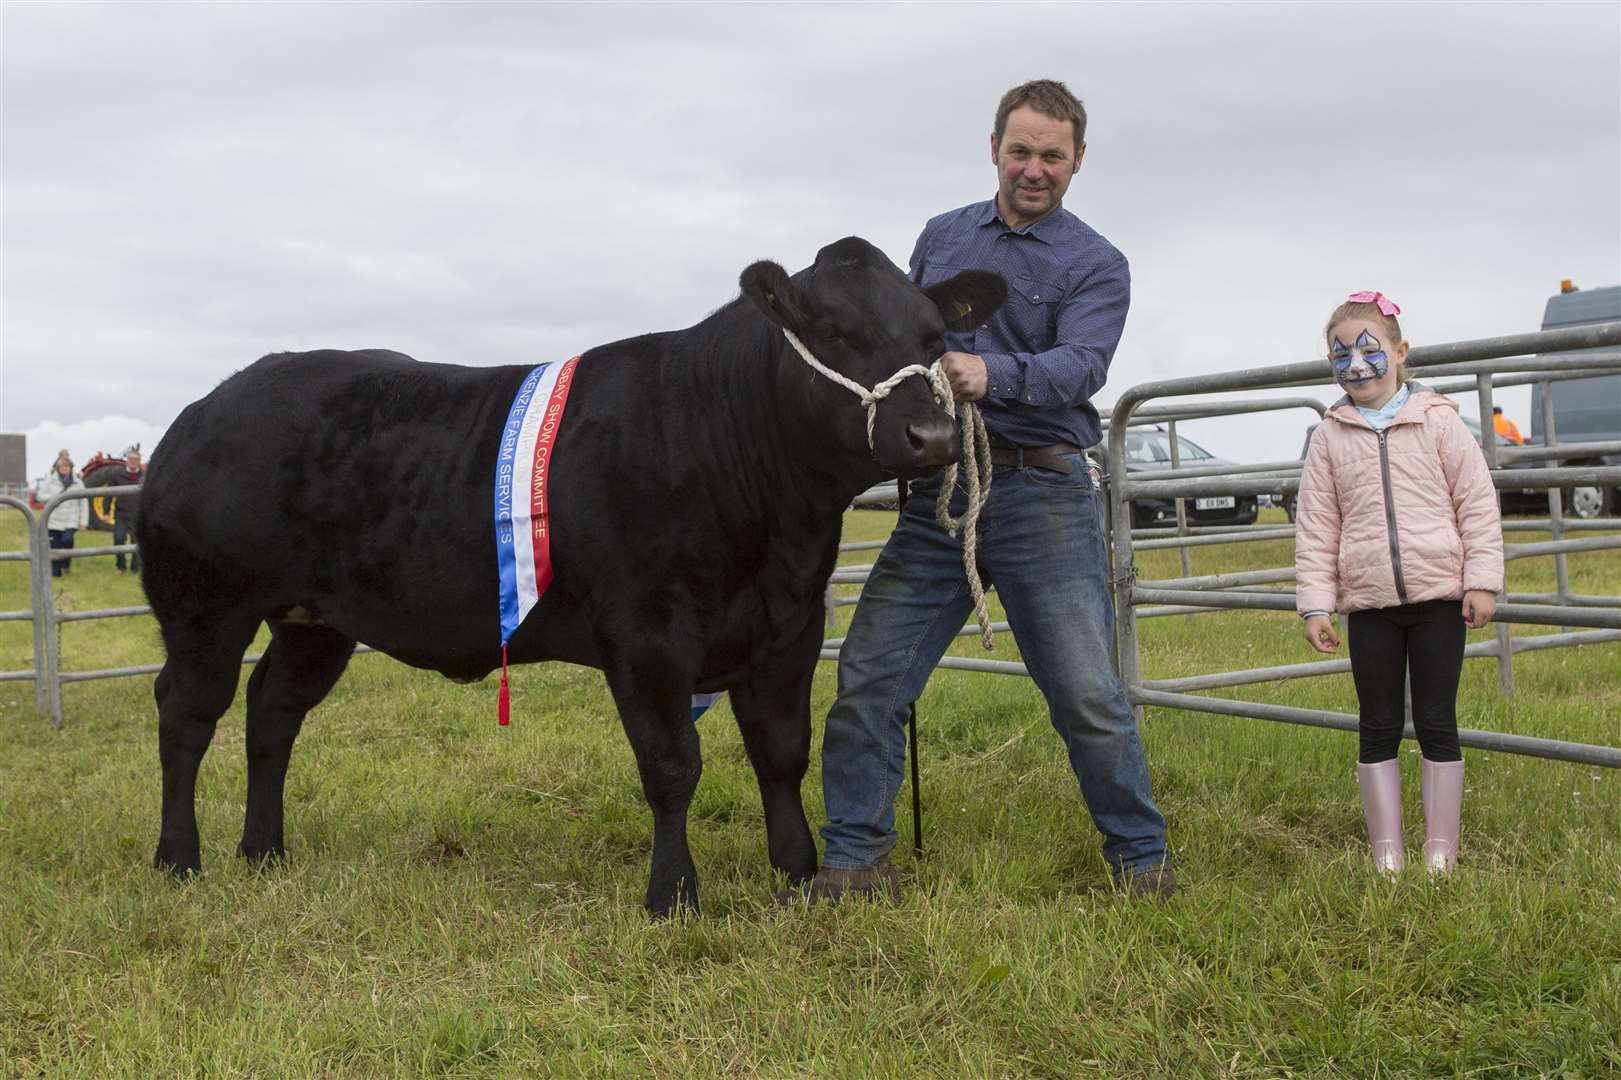 Champion of champions at the 2019 Canisbay Show went to the supreme cattle winner Double or Quits, an 18-month-old British Blue heifer, owned by Gordon Begg. Also in the picture is Gordon's daughter Morven. Picture: Robert MacDonald / Northern Studios